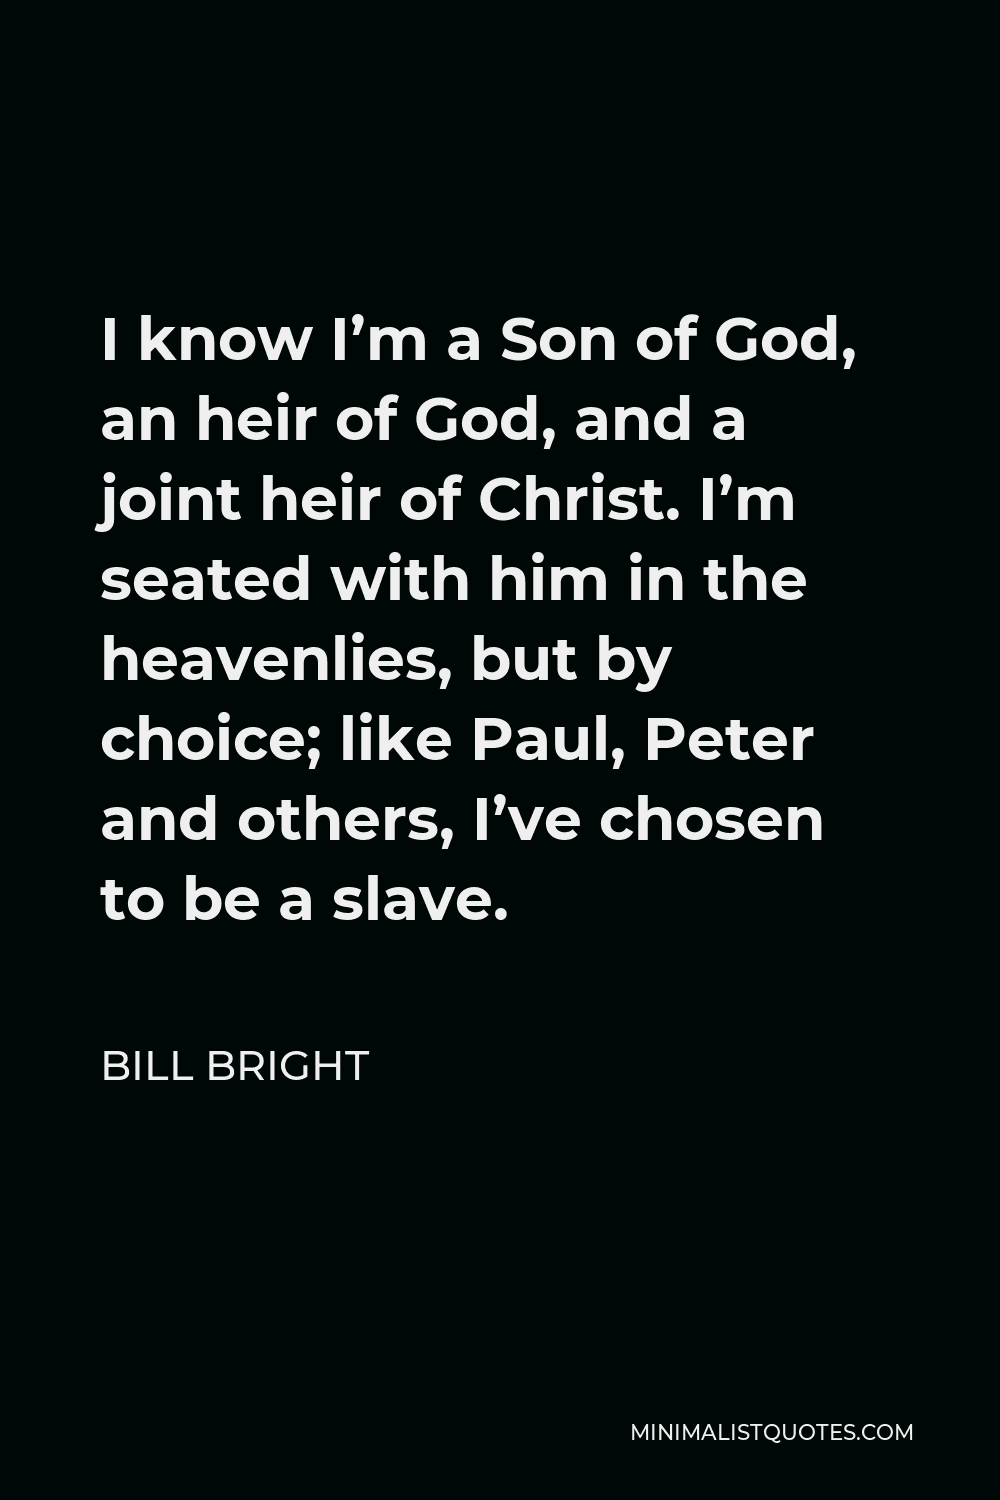 Bill Bright Quote - I know I’m a Son of God, an heir of God, and a joint heir of Christ. I’m seated with him in the heavenlies, but by choice; like Paul, Peter and others, I’ve chosen to be a slave.